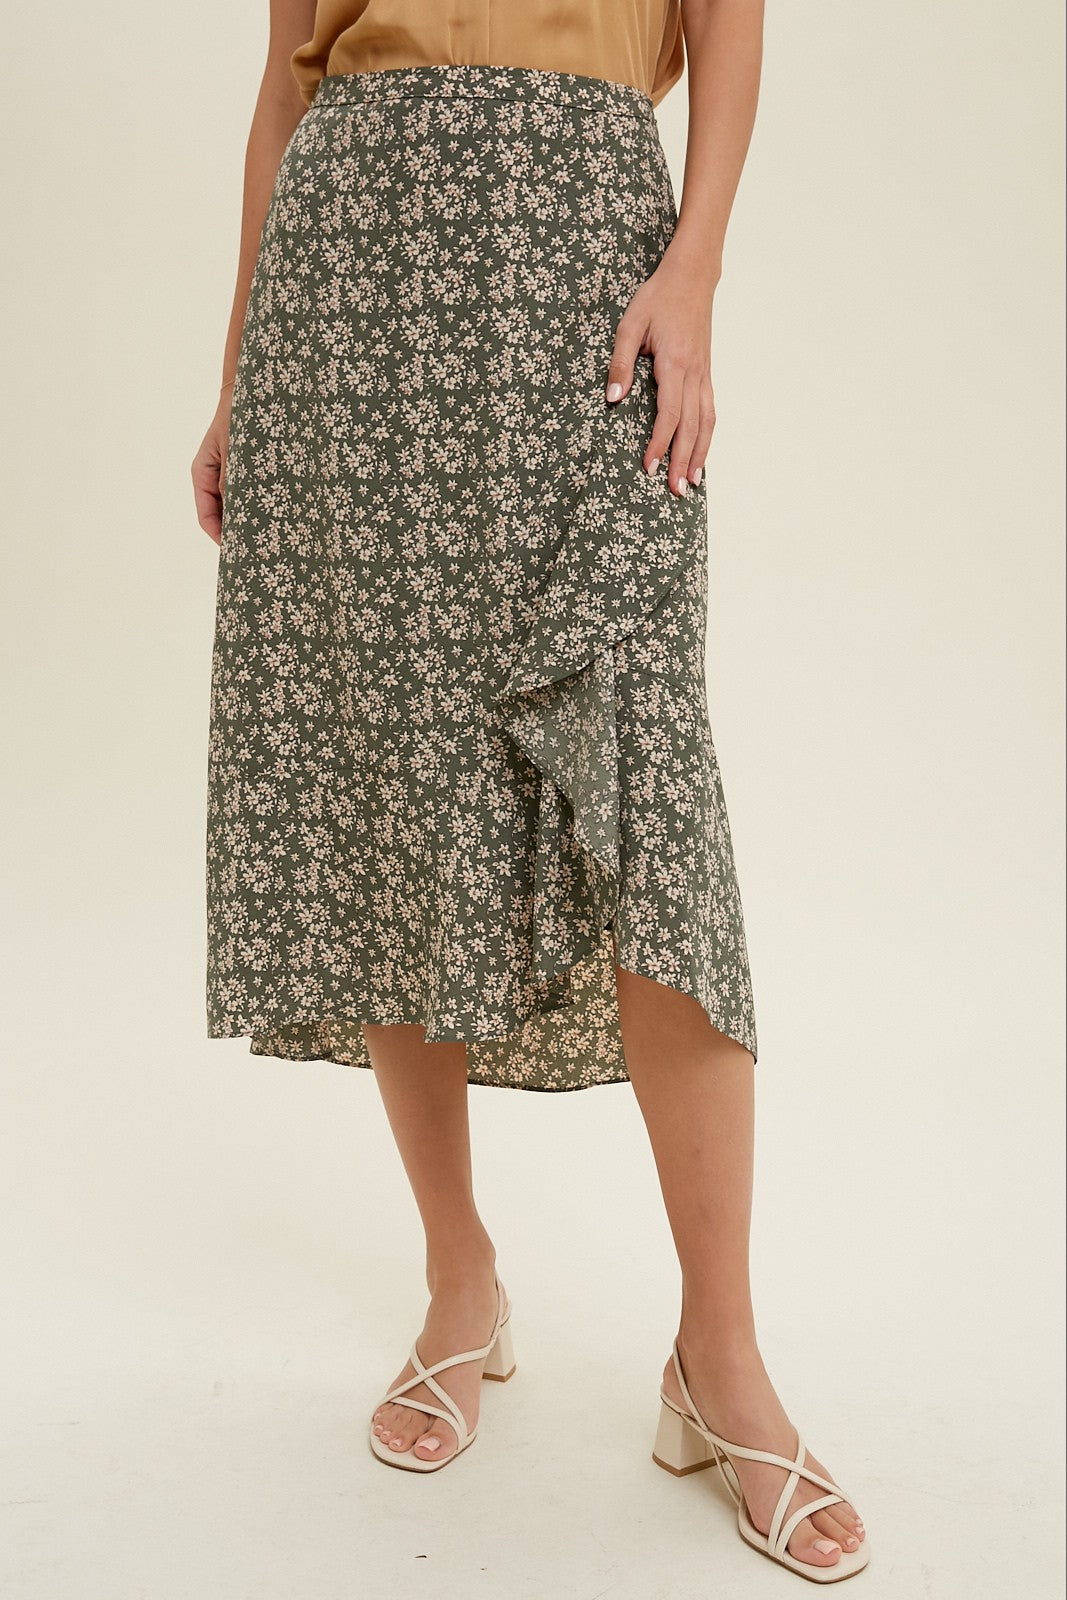 Floral Midi Skirt With Ruffle Detail